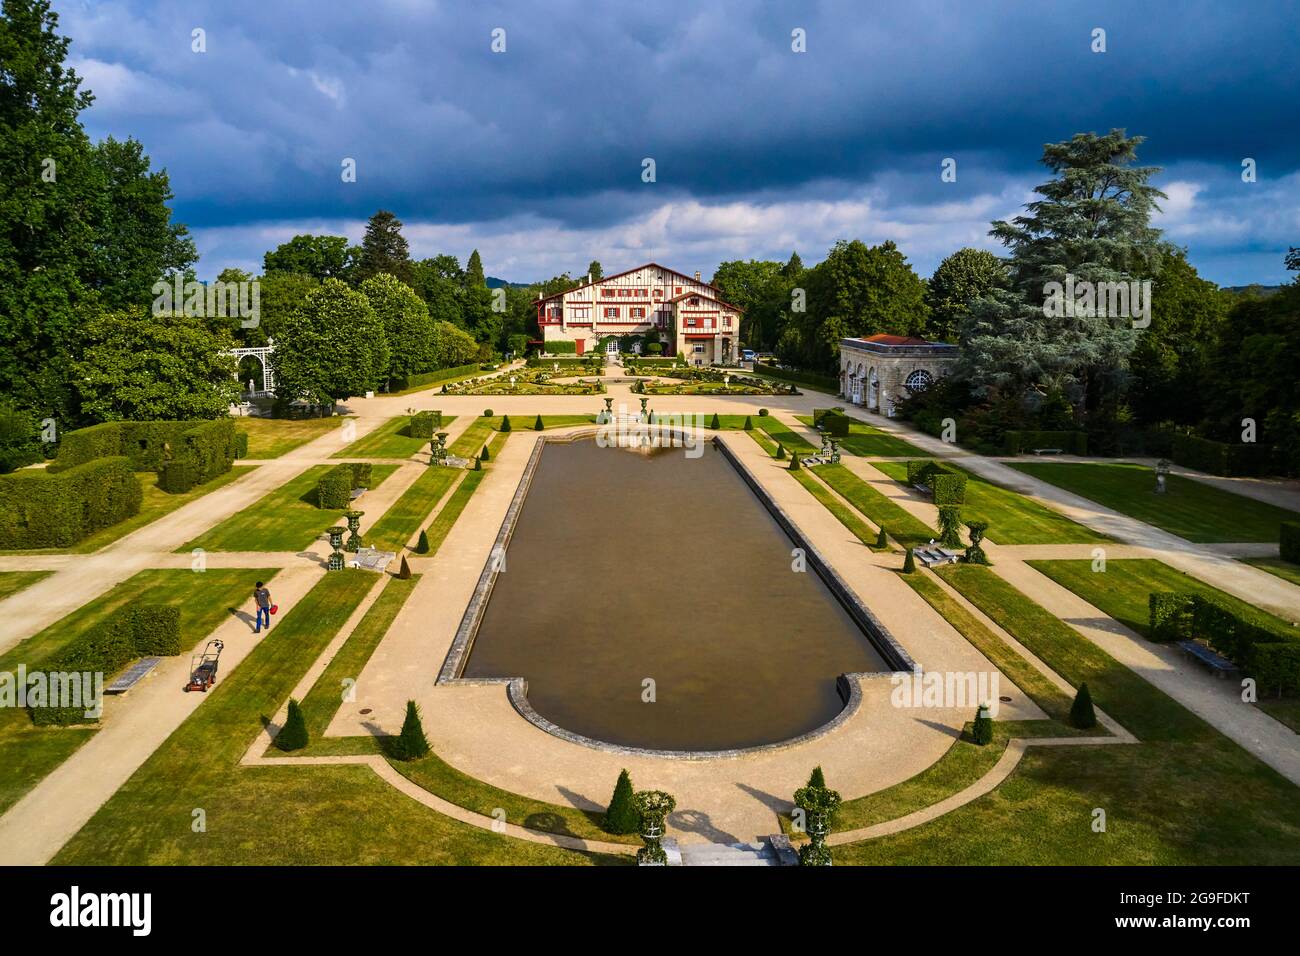 France, Pyrenees-Atlantiques, Basque Country, Cambo-les-Bains, Villa Arnaga and its formal garden, museum and house of Edmond Rostand in neo-Basque st Stock Photo